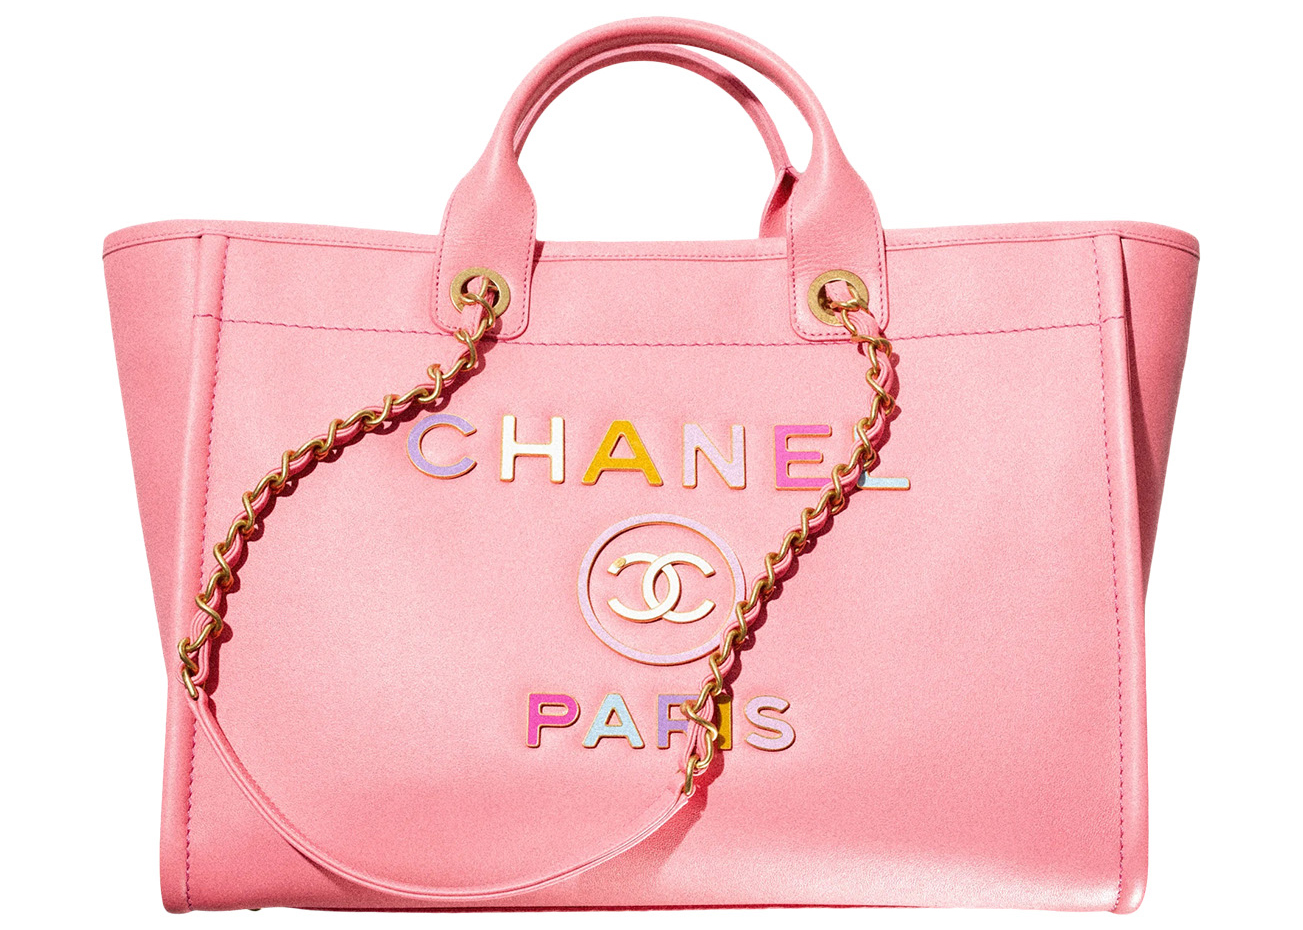 Chanel 22s Small Heart Bag in Pink Brand New orangeporter